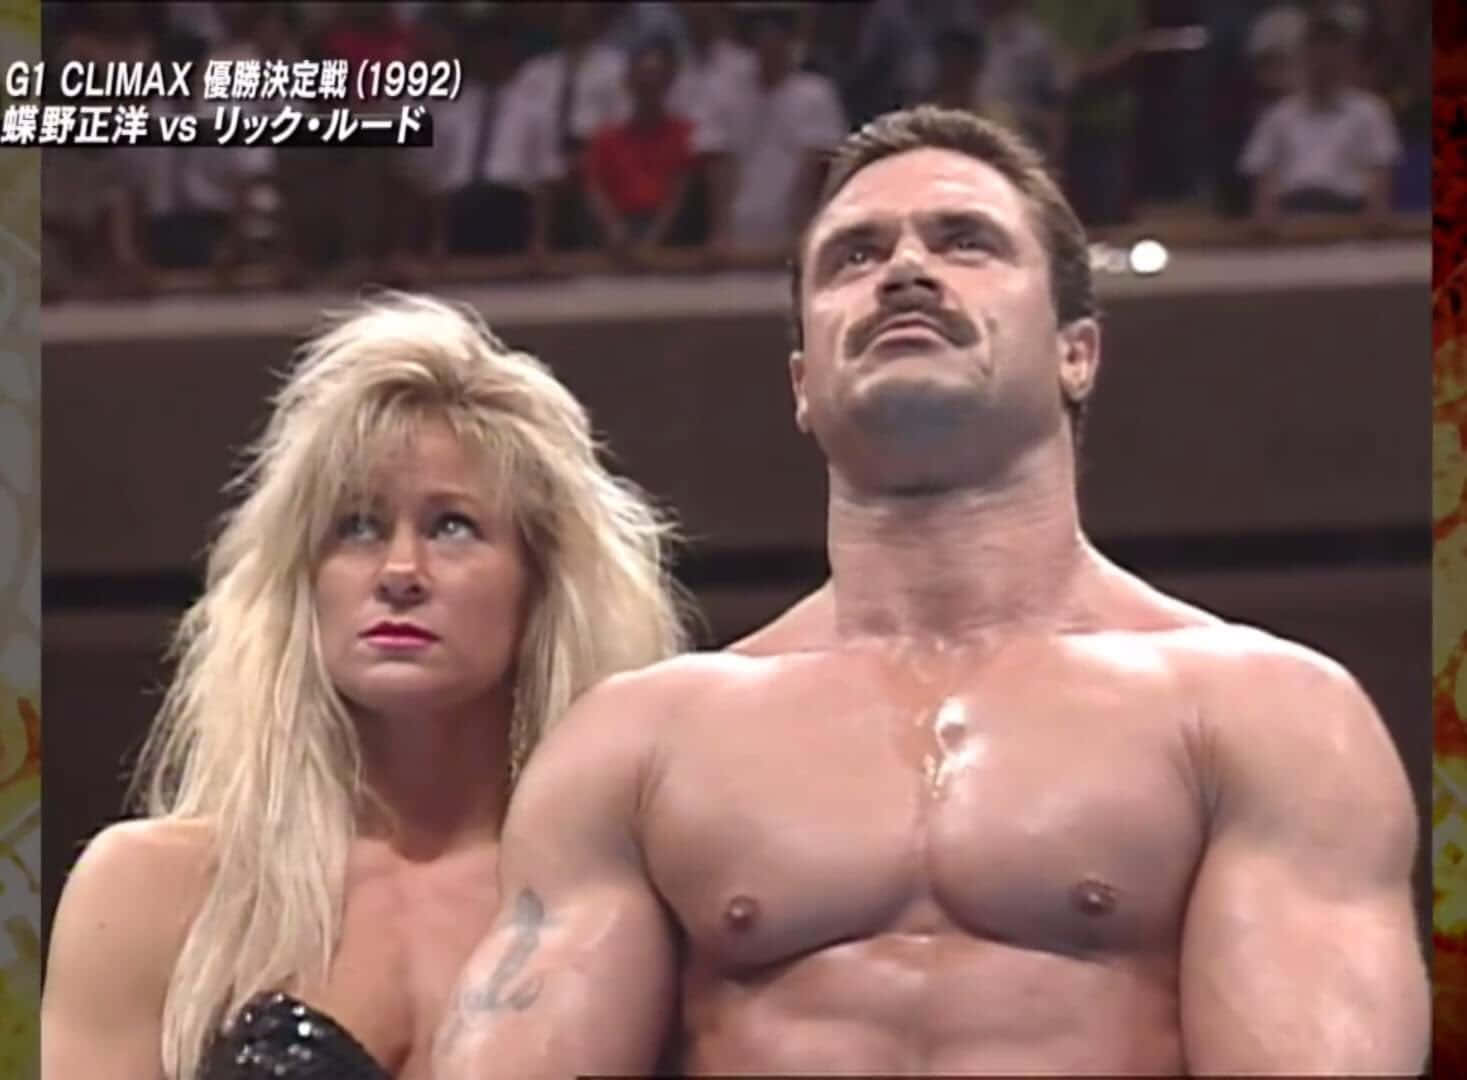 Rickrude Madusa G1 Climax Wrestlers Would Be Translated To 